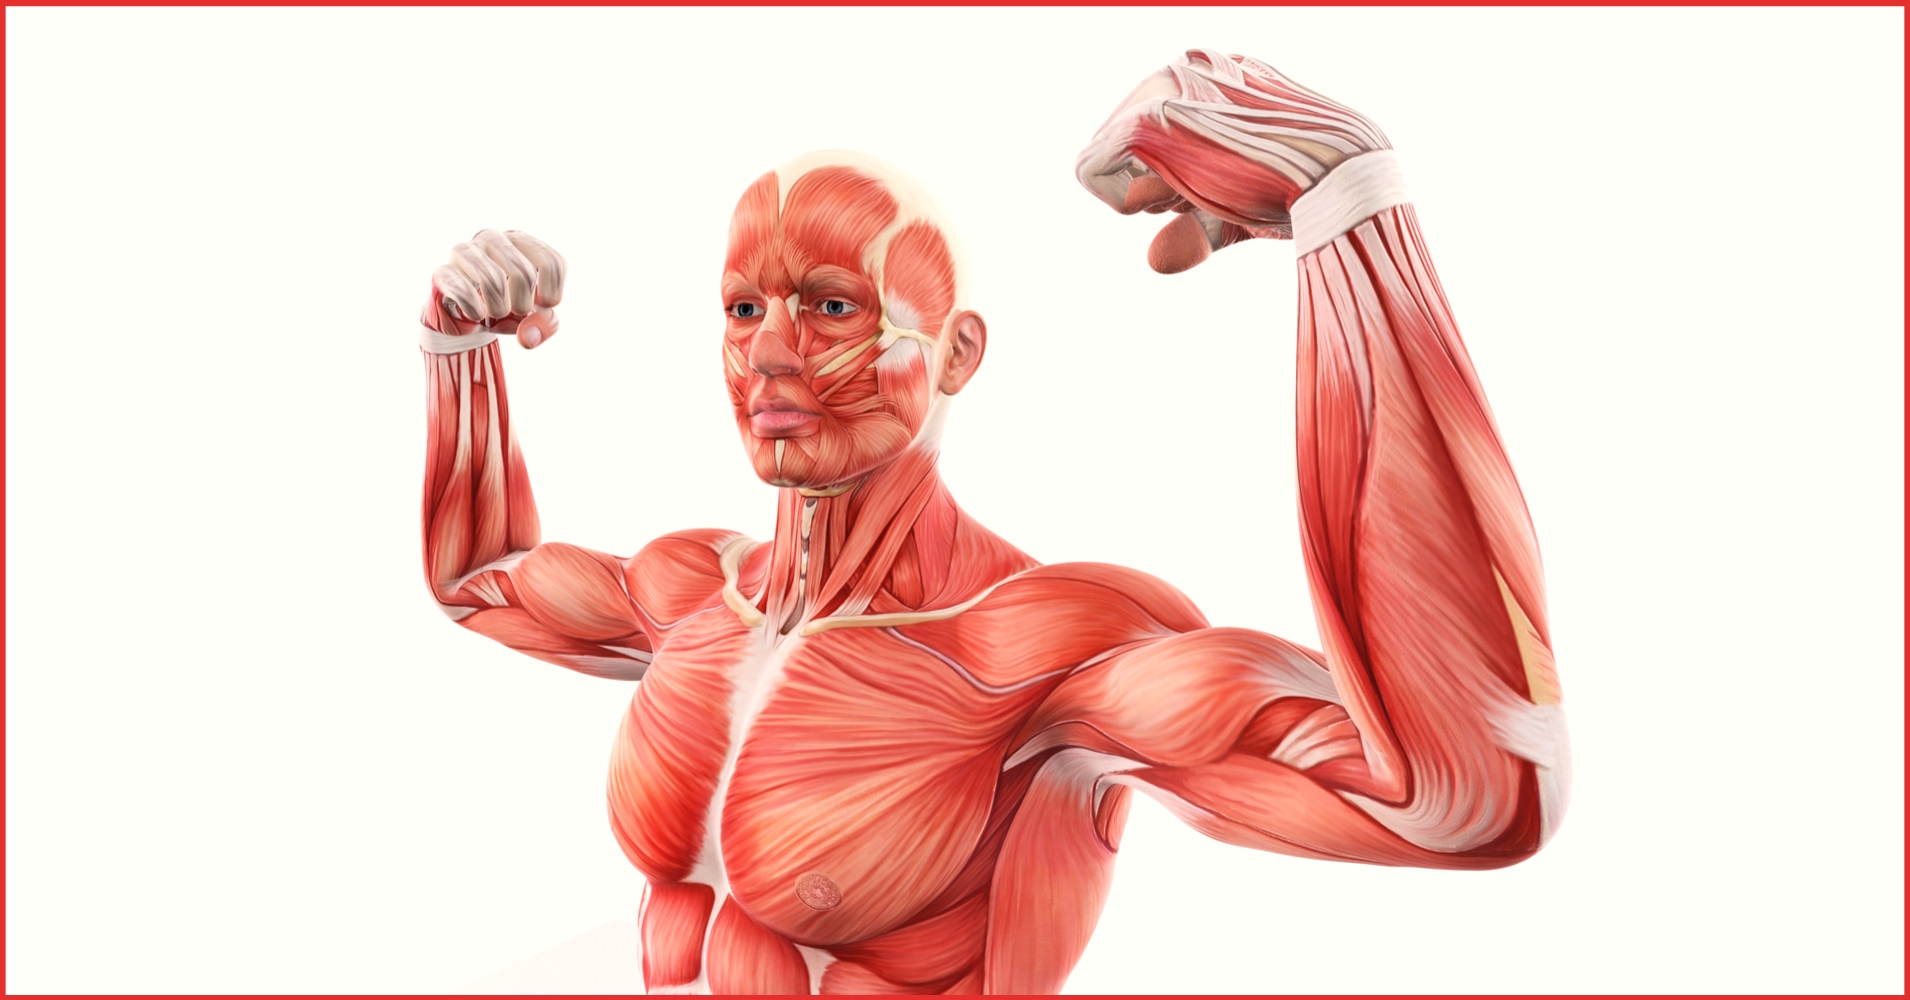 Muscle Anatomy Quiz Question 1 - Which muscle is NOT involved in facial